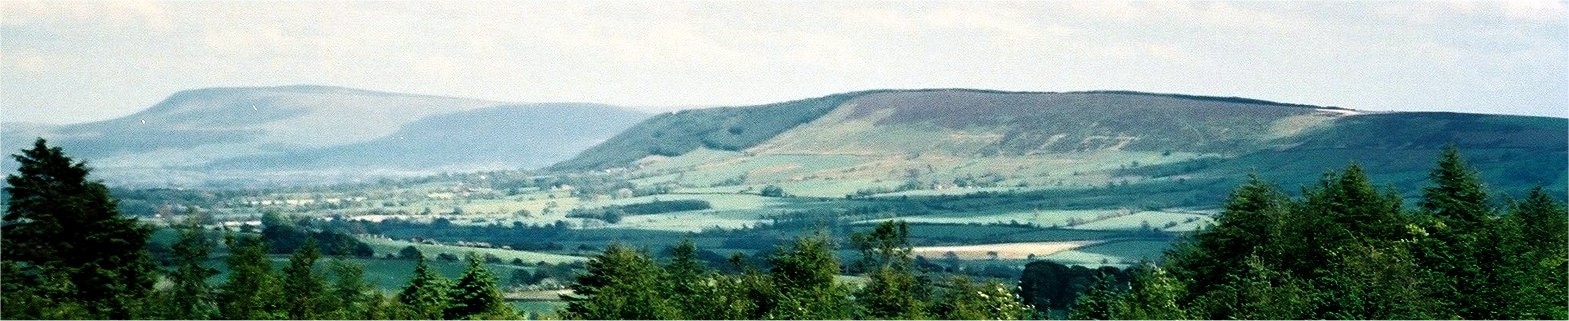 The east end of Longridge Fell, in Lancashire, England. Behind and to the left is Pendle Hill. Photographed from Beacon Fell.